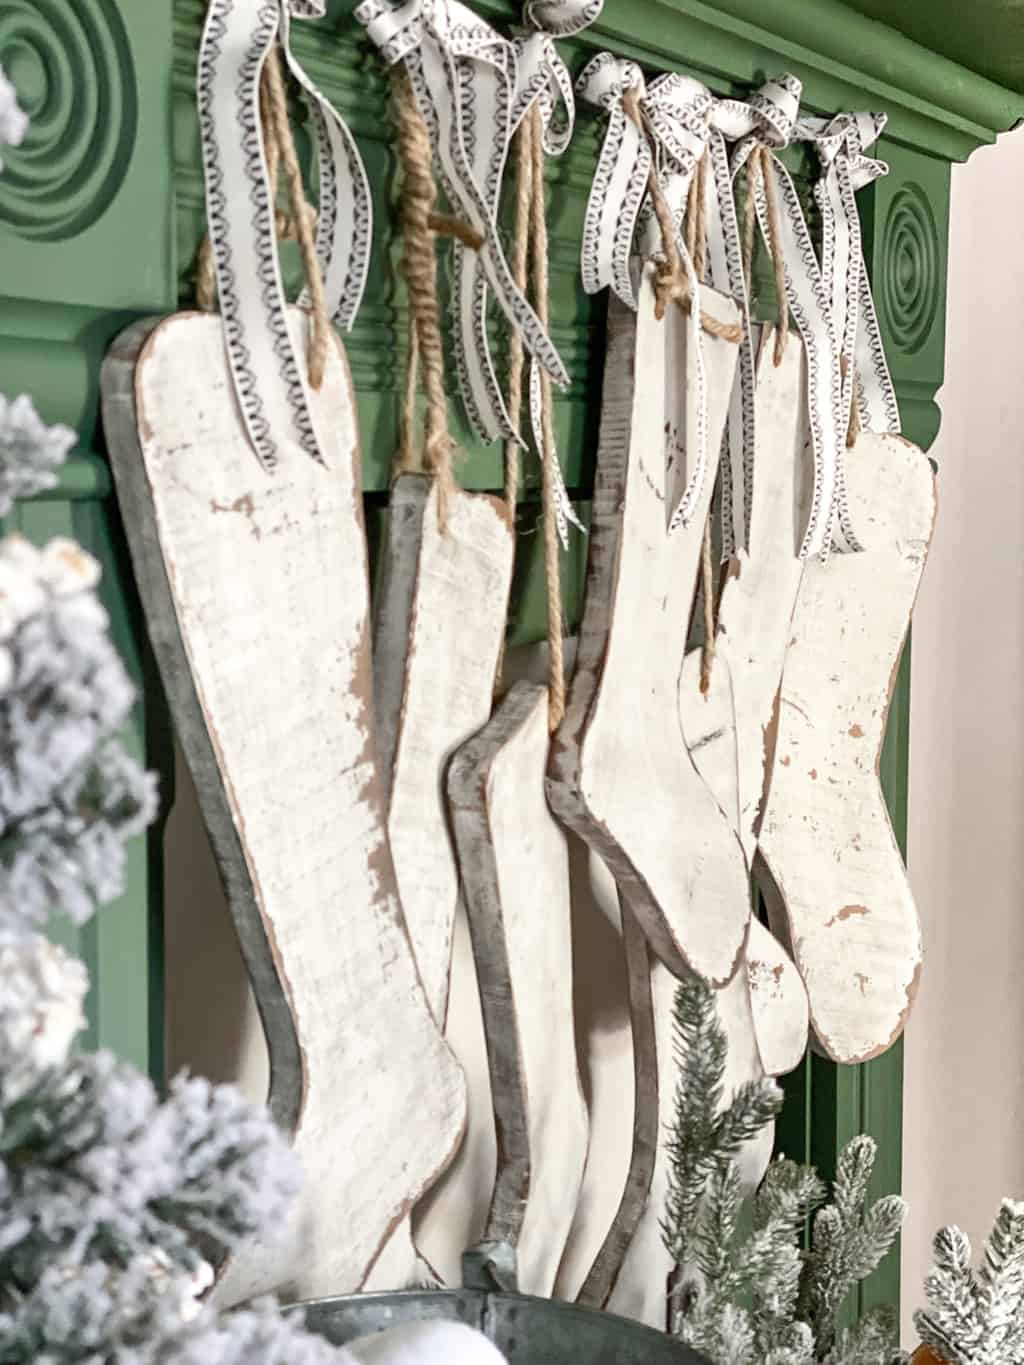 Stockings come in all shapes, sizes and colors. This tutorial will show you how to make DIY wood Christmas stockings from scrap wood and other supplies you may have on hand.